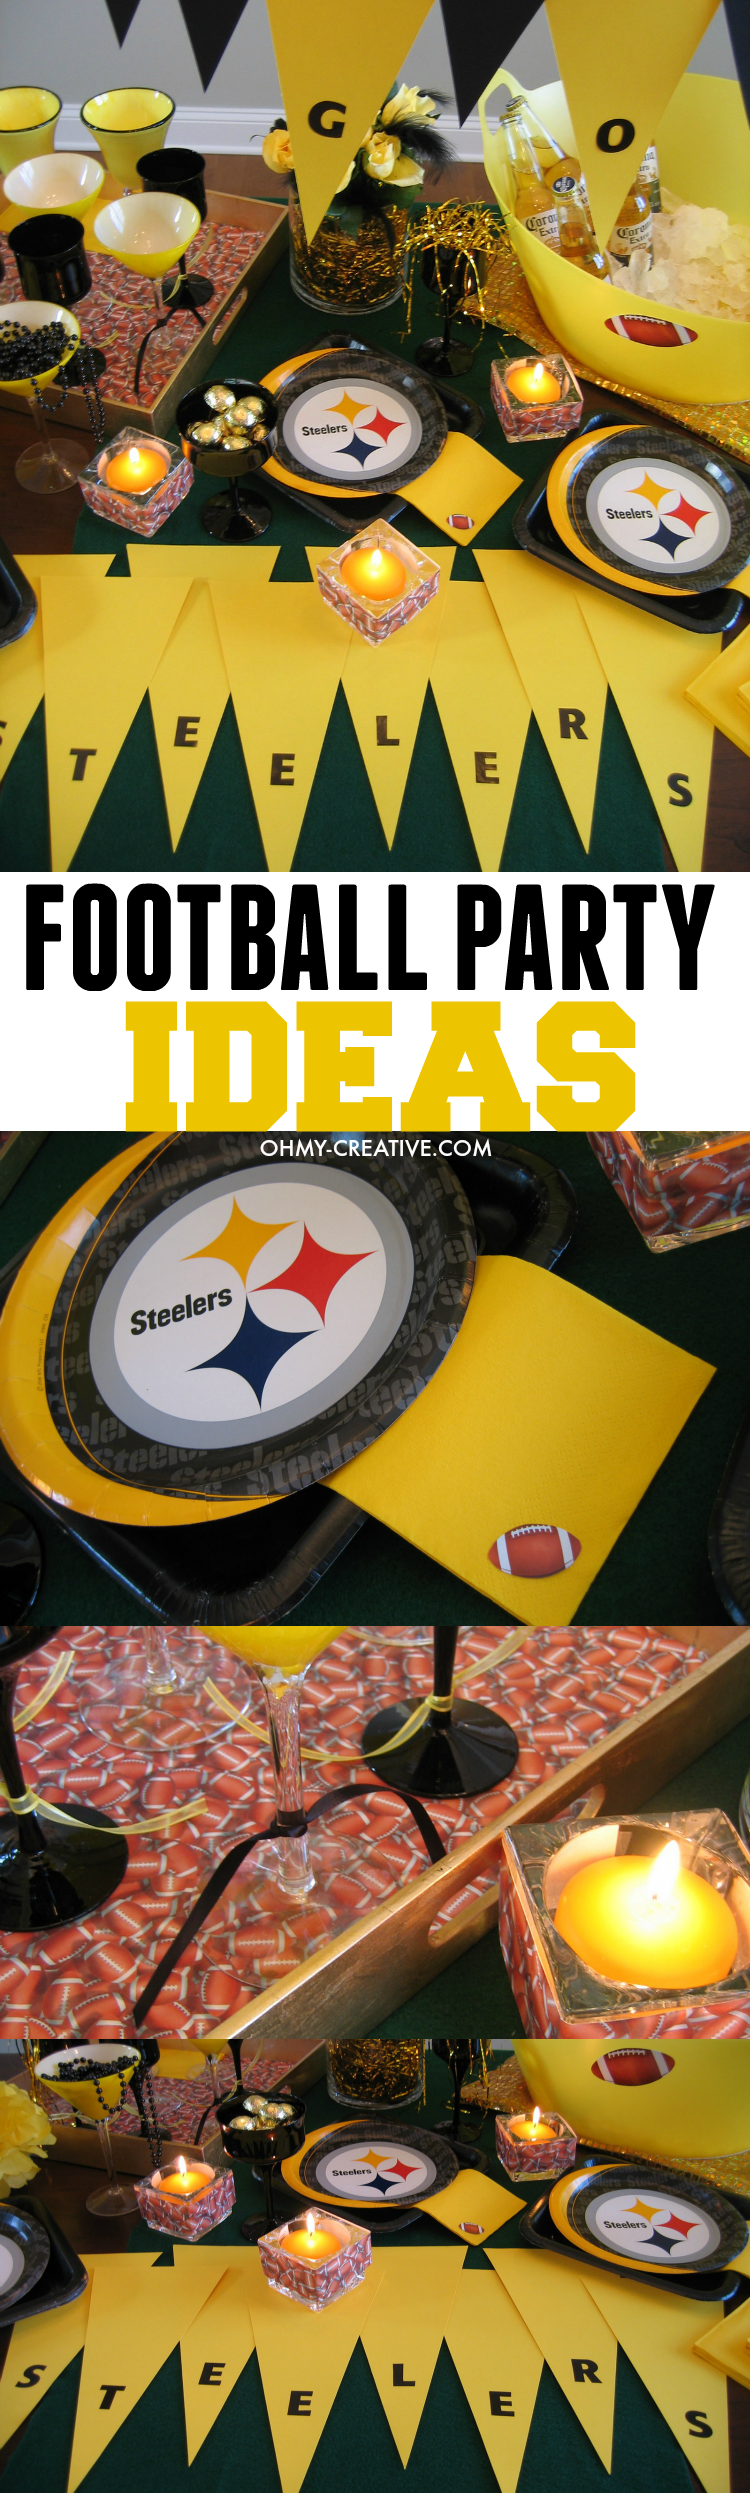 Football party Ideas that can be used for any team  |  OHMY-CREATIVE.COM